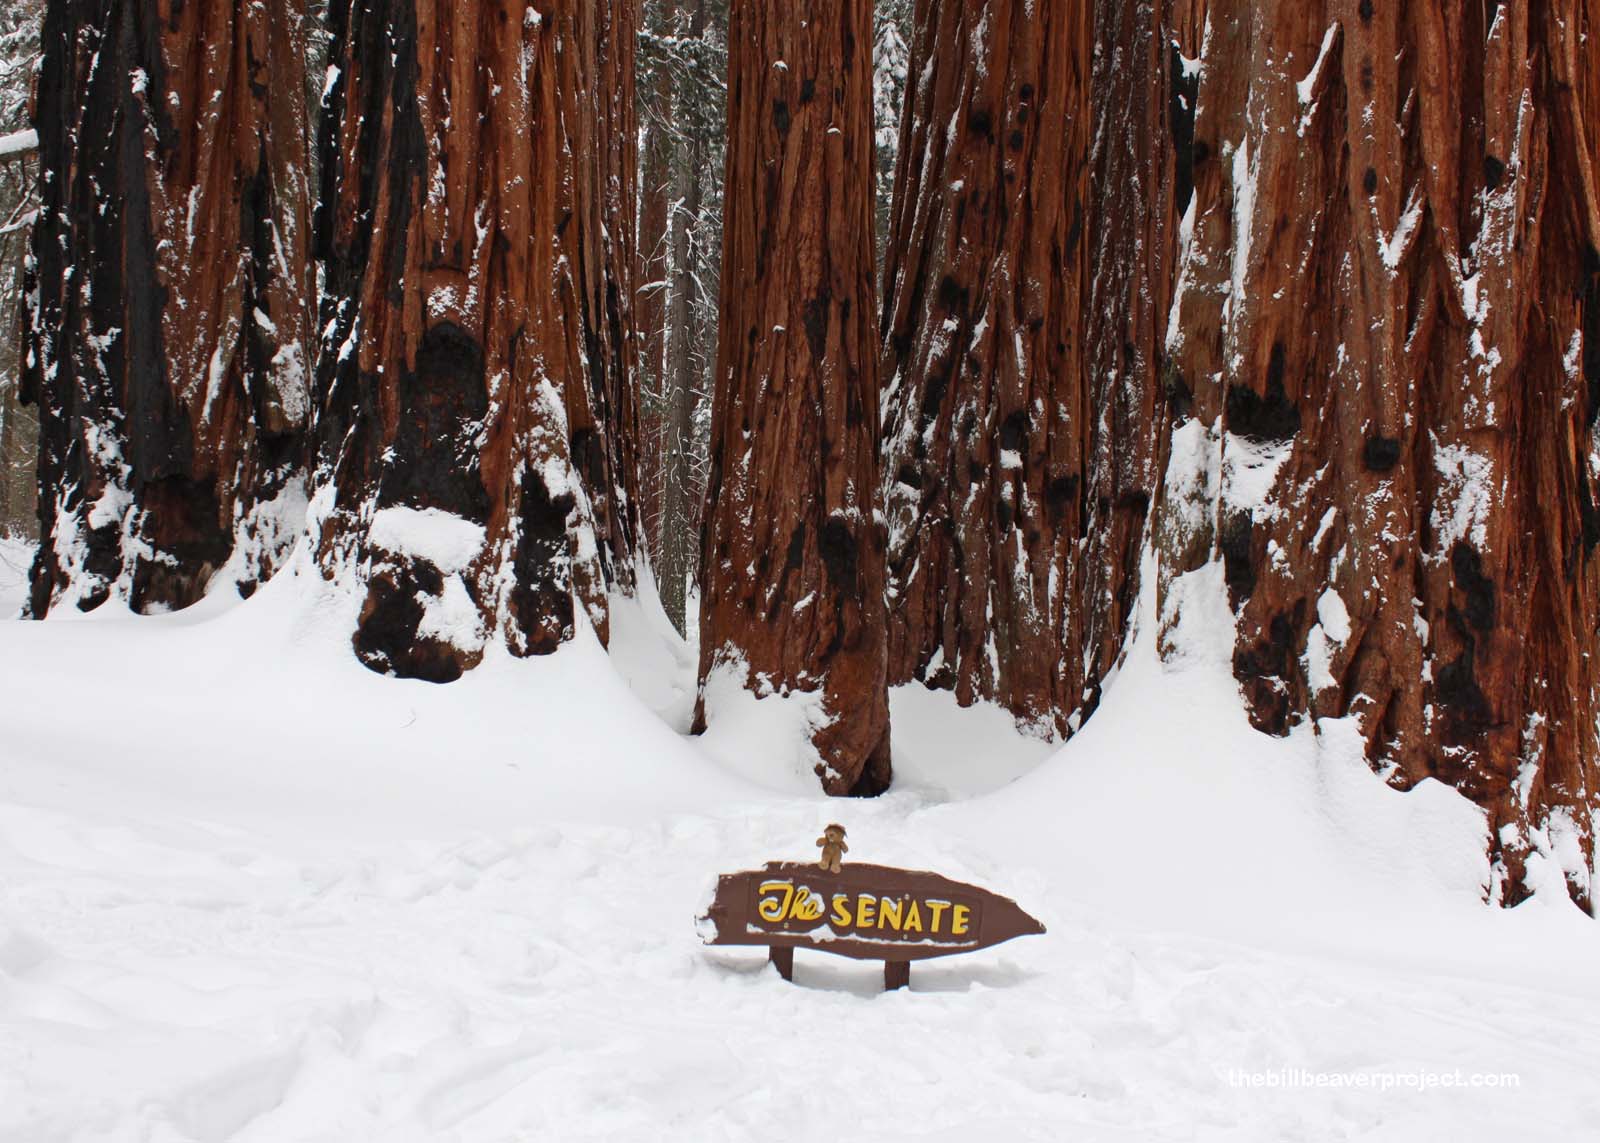 This huge sequoia grove is called The Senate!